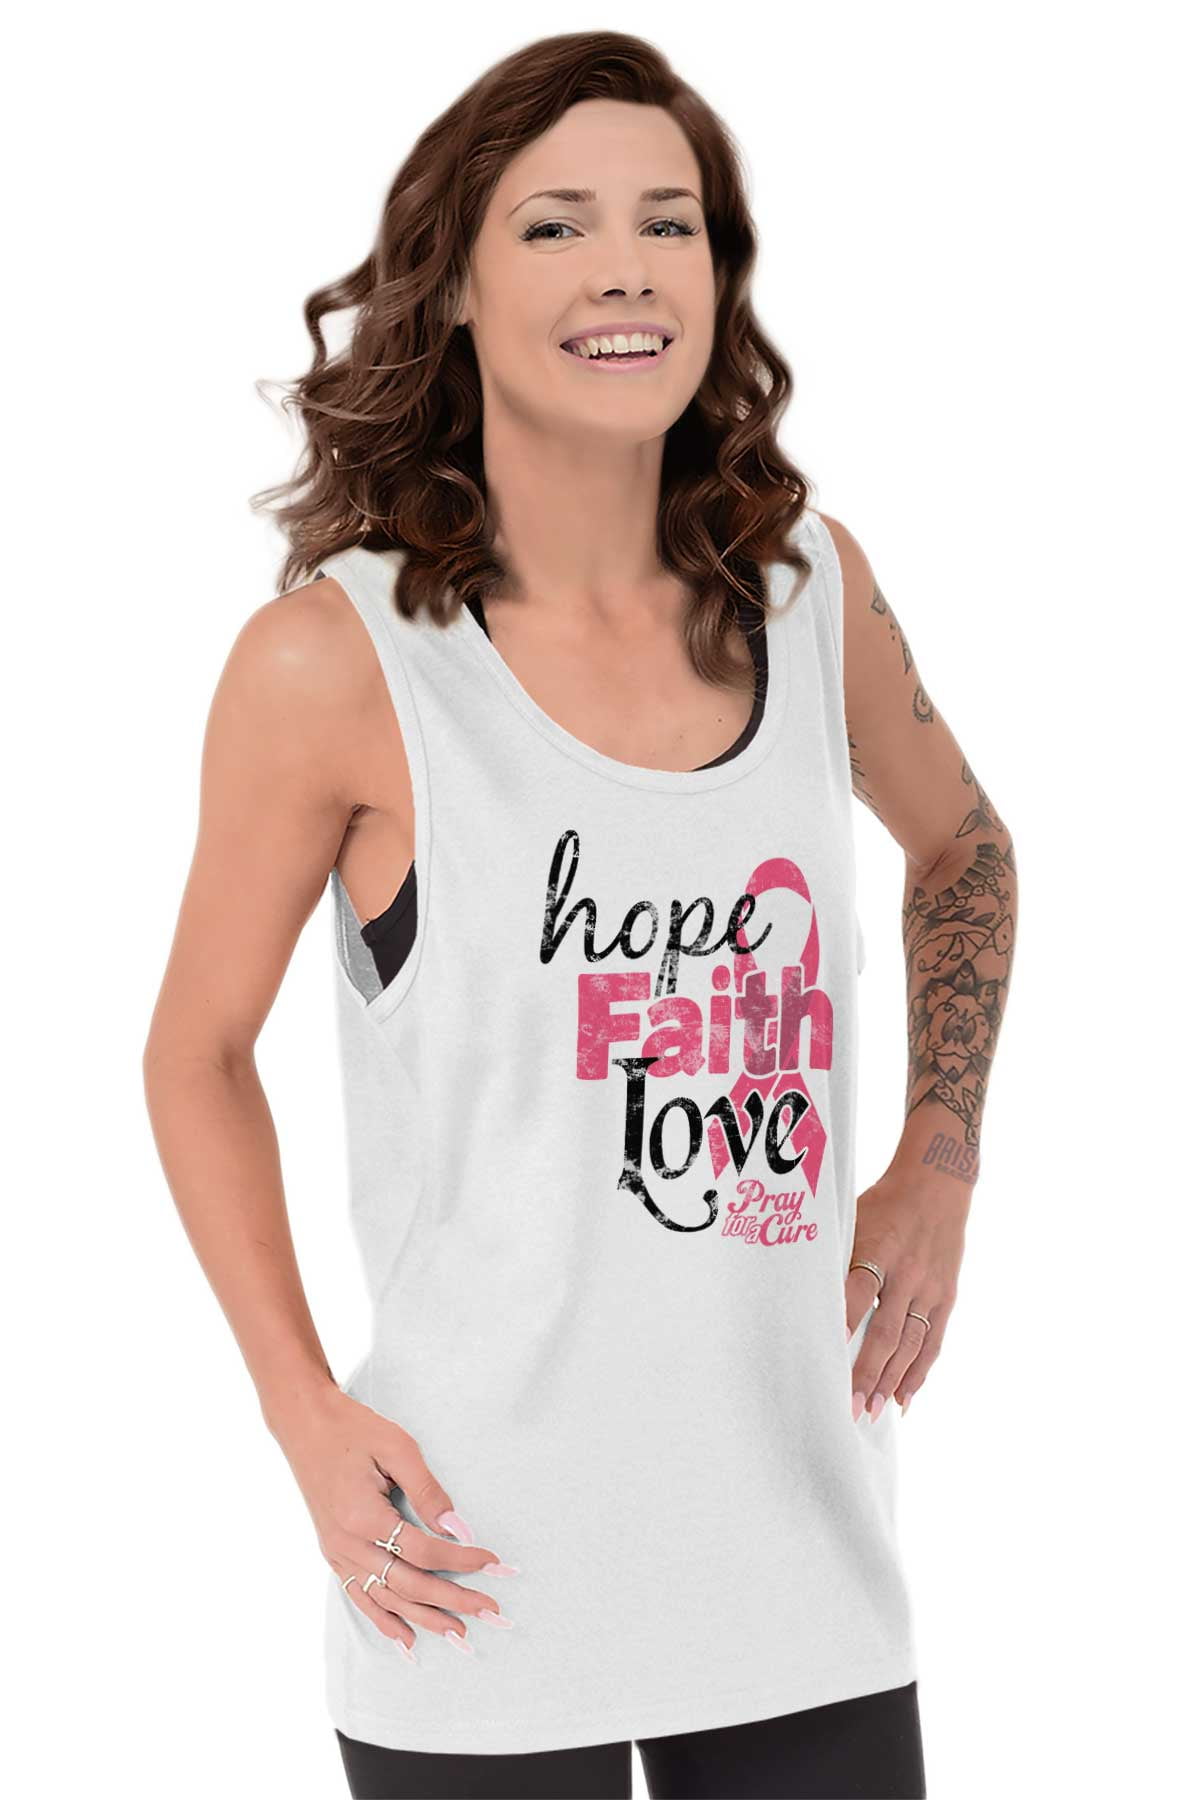 Details about   Fight Cancer I Can Womens White Muscle Top